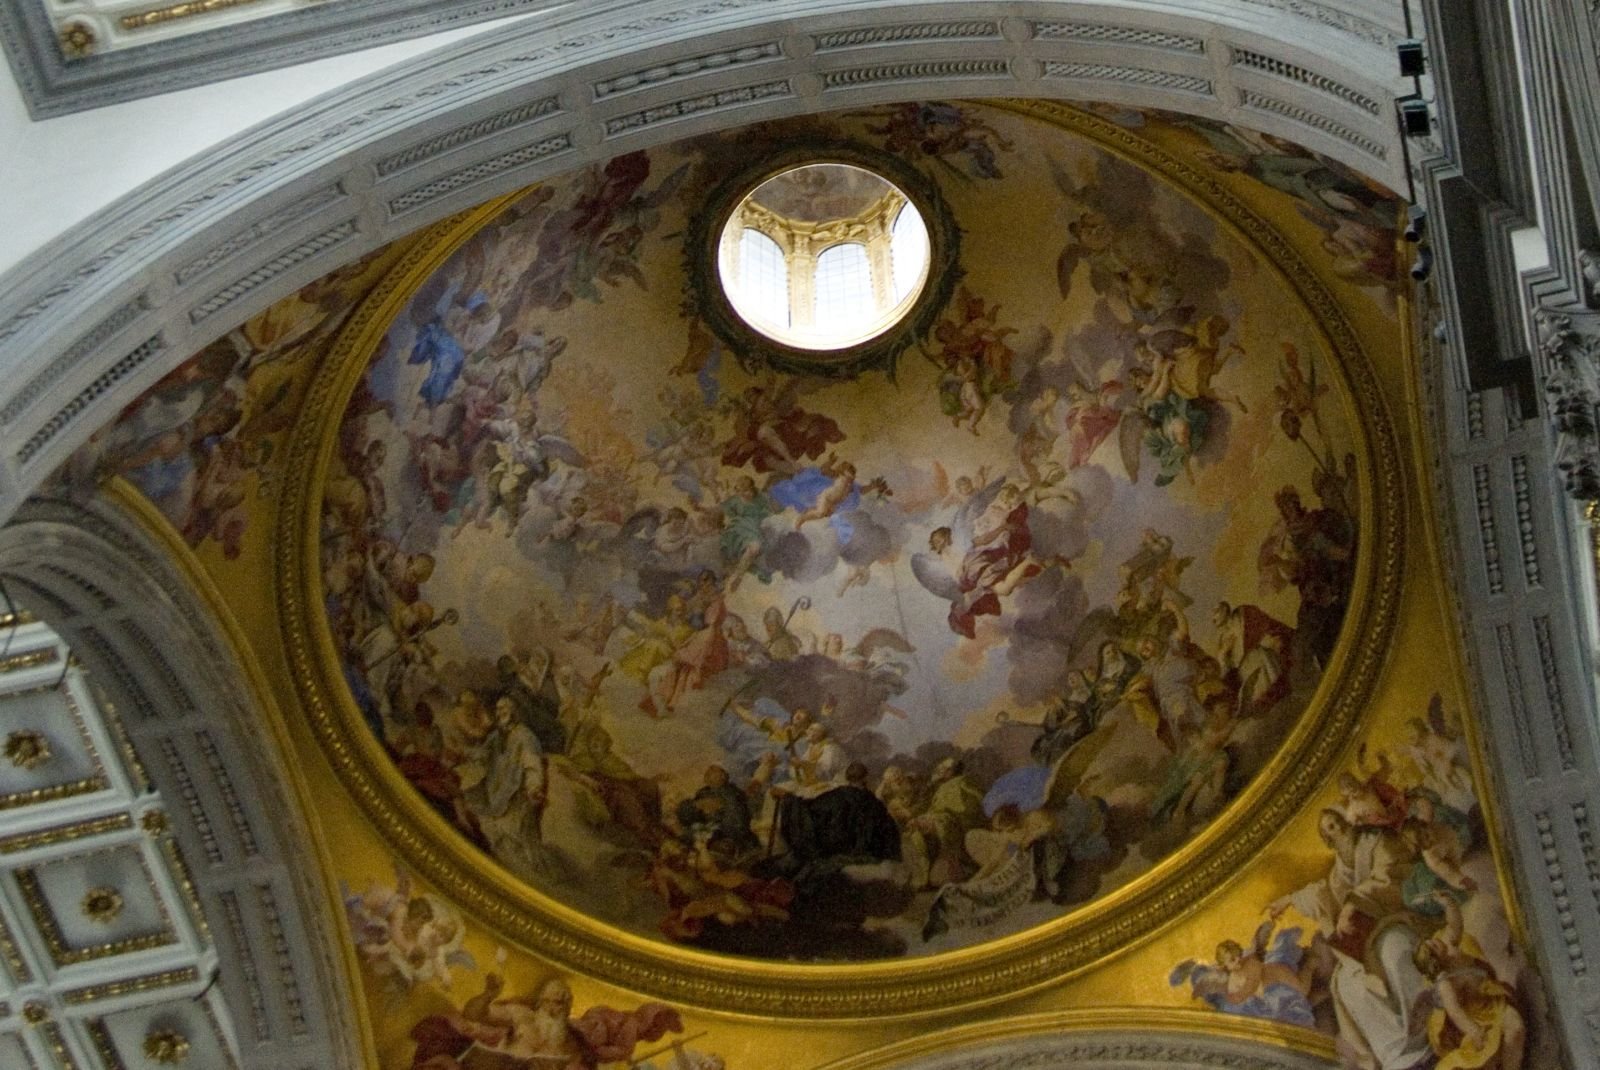 Firenze_-_Florence_-_Basilica_di_San_Lorenzo_-_Designed_by_Brunelleschi_-_View_Up_into_the_Cupola_from_the_South_Transept.jpg